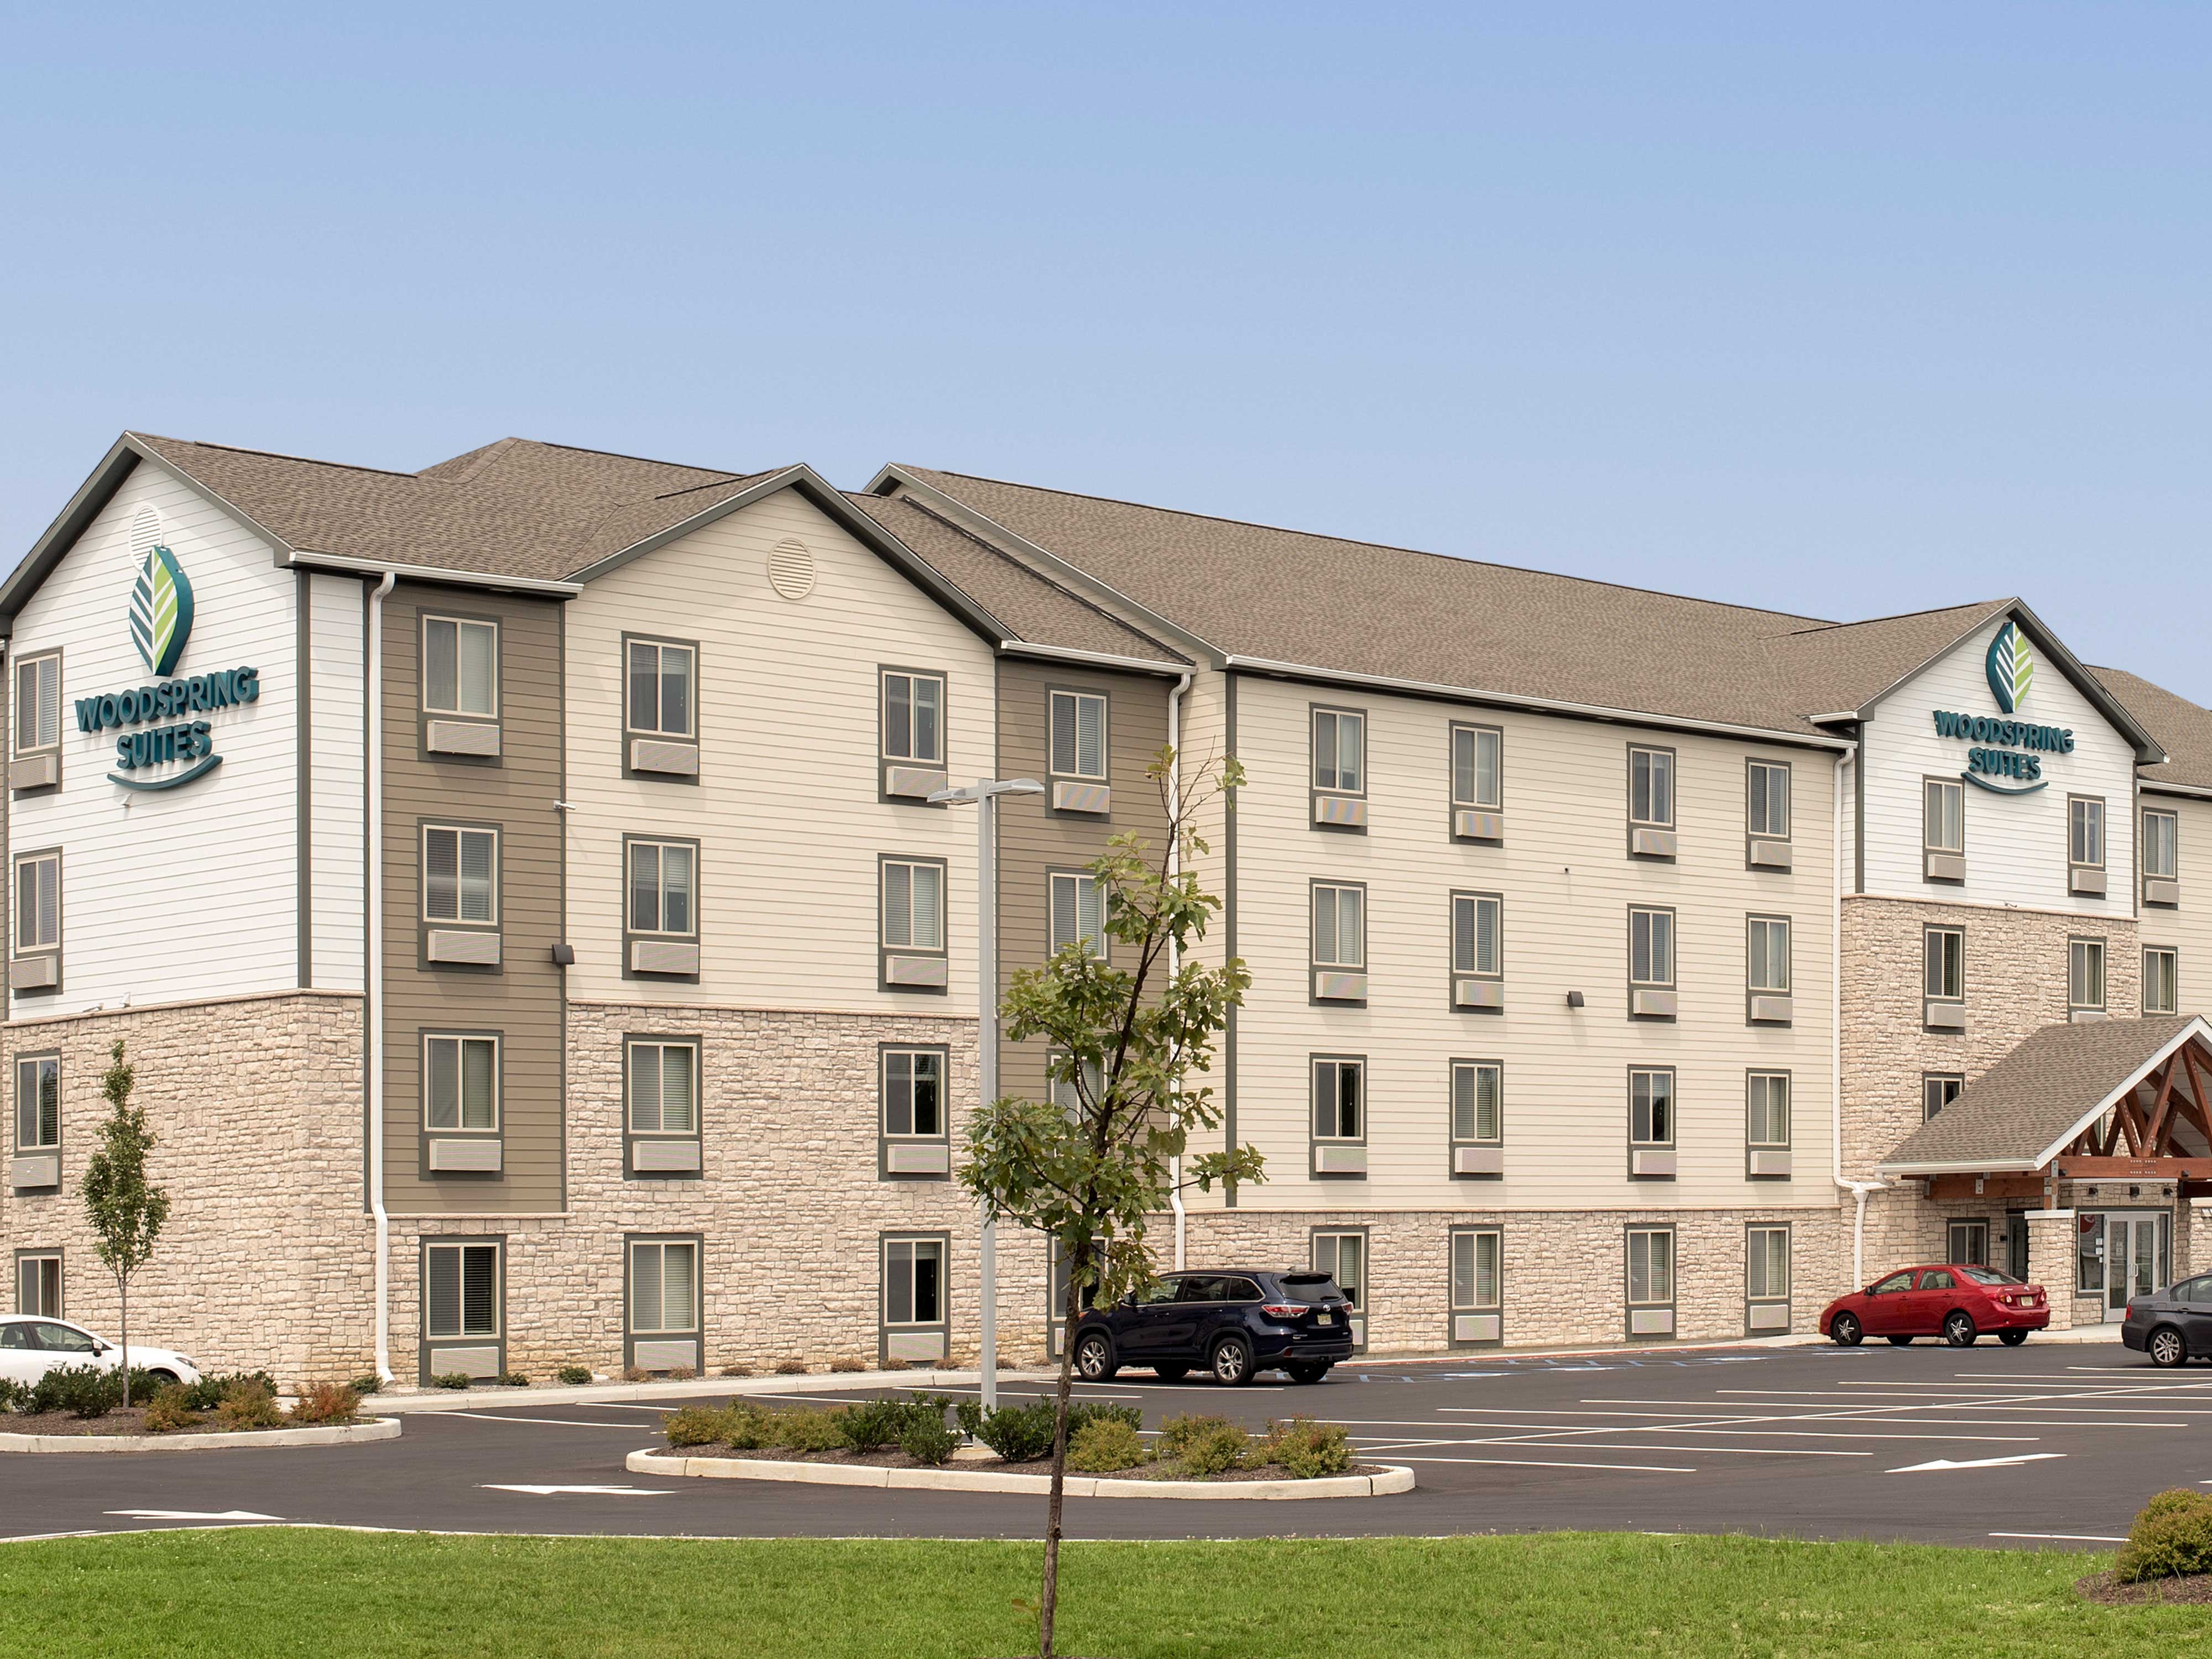 WoodSpring Suites Cherry Hill Photo